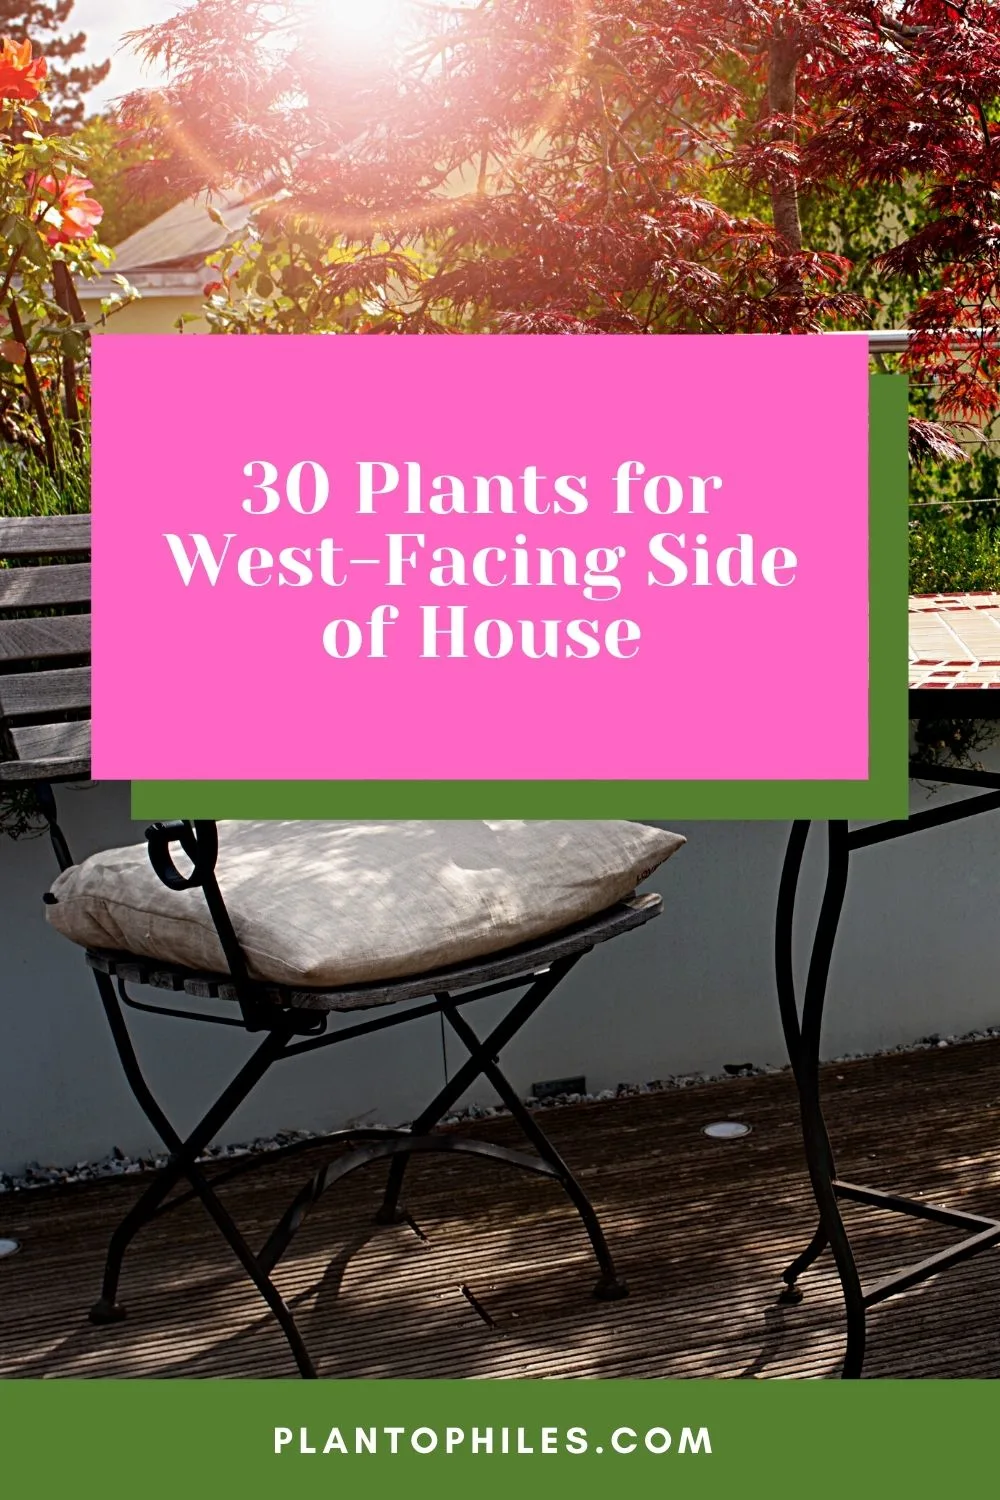 30 Plants for West-Facing Side of the House